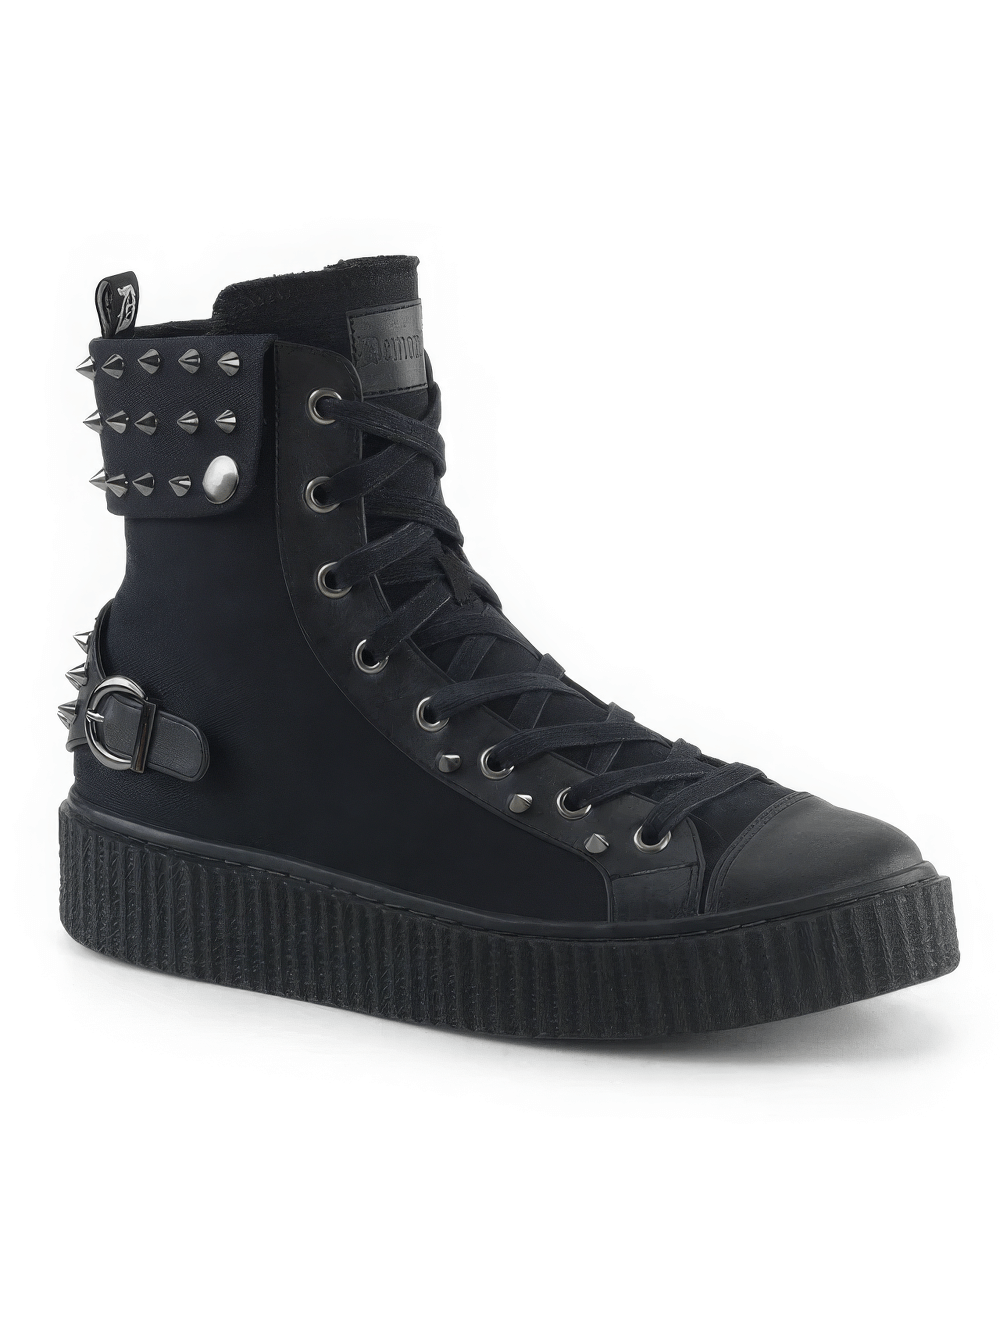 DEMONIA Punk High-Top Creeper Sneakers with Buckle and Studs